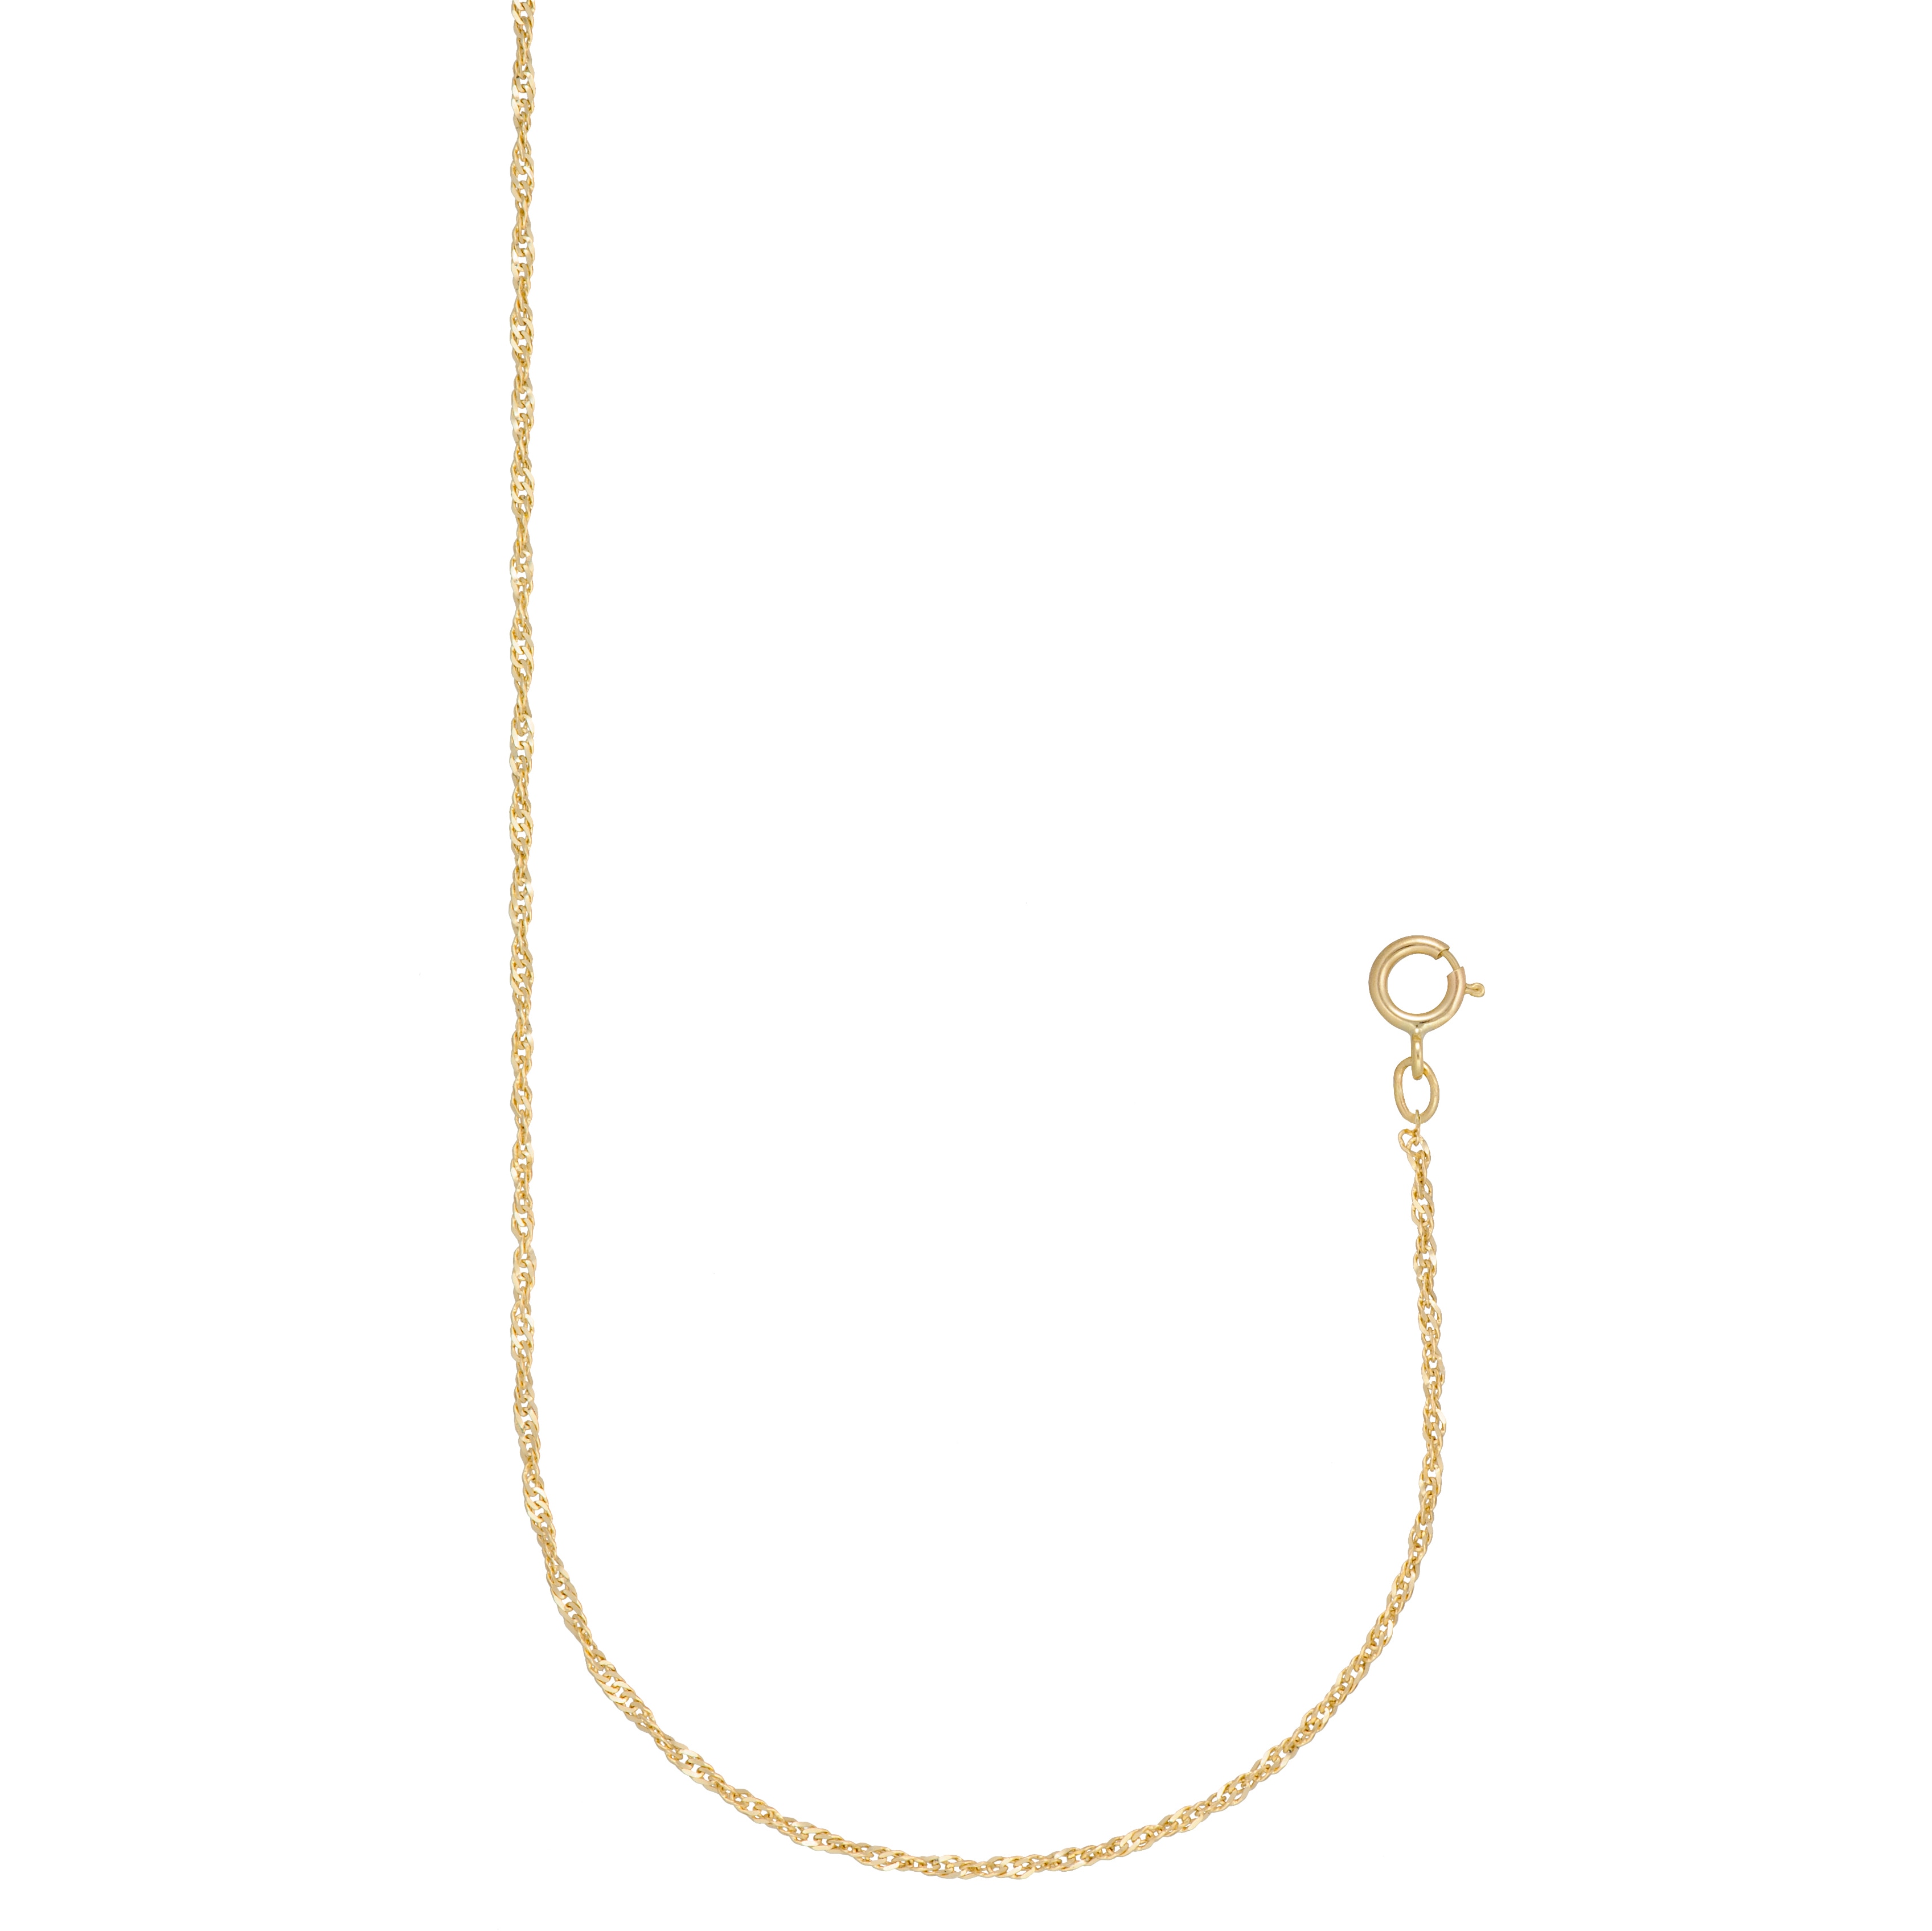 Jewellery - Necklaces & Pendants - Chains - TruGold 10K Yellow